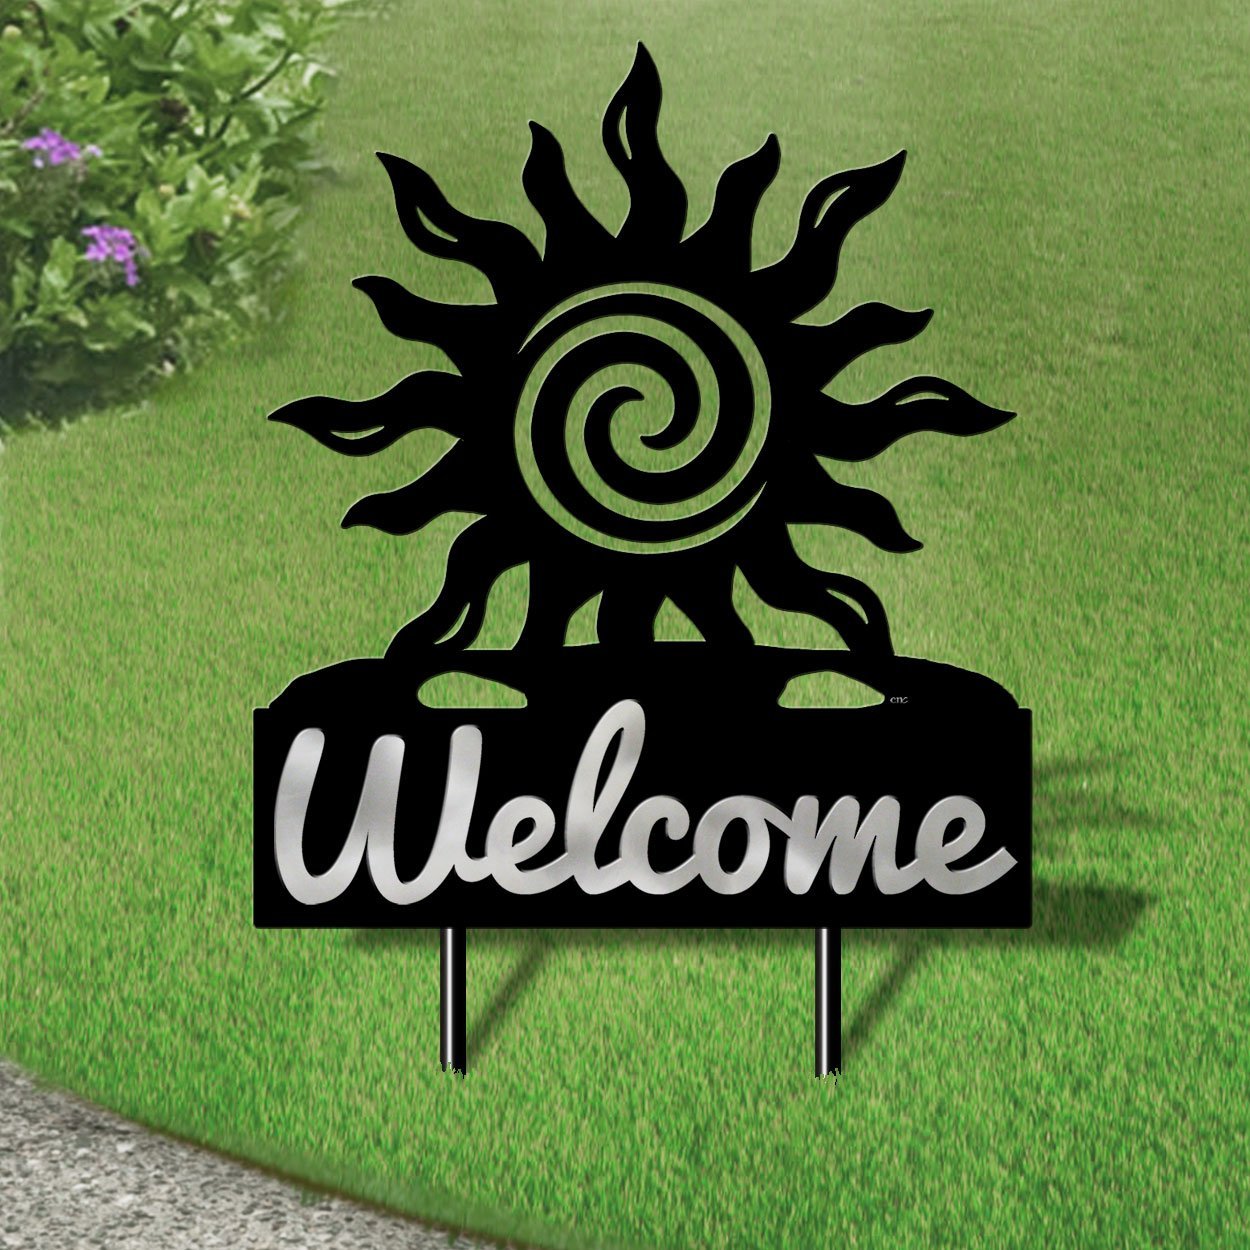 610228 - Large 25in Wide Spiral Sunset Design Horizontal Metal Welcome Yard Sign